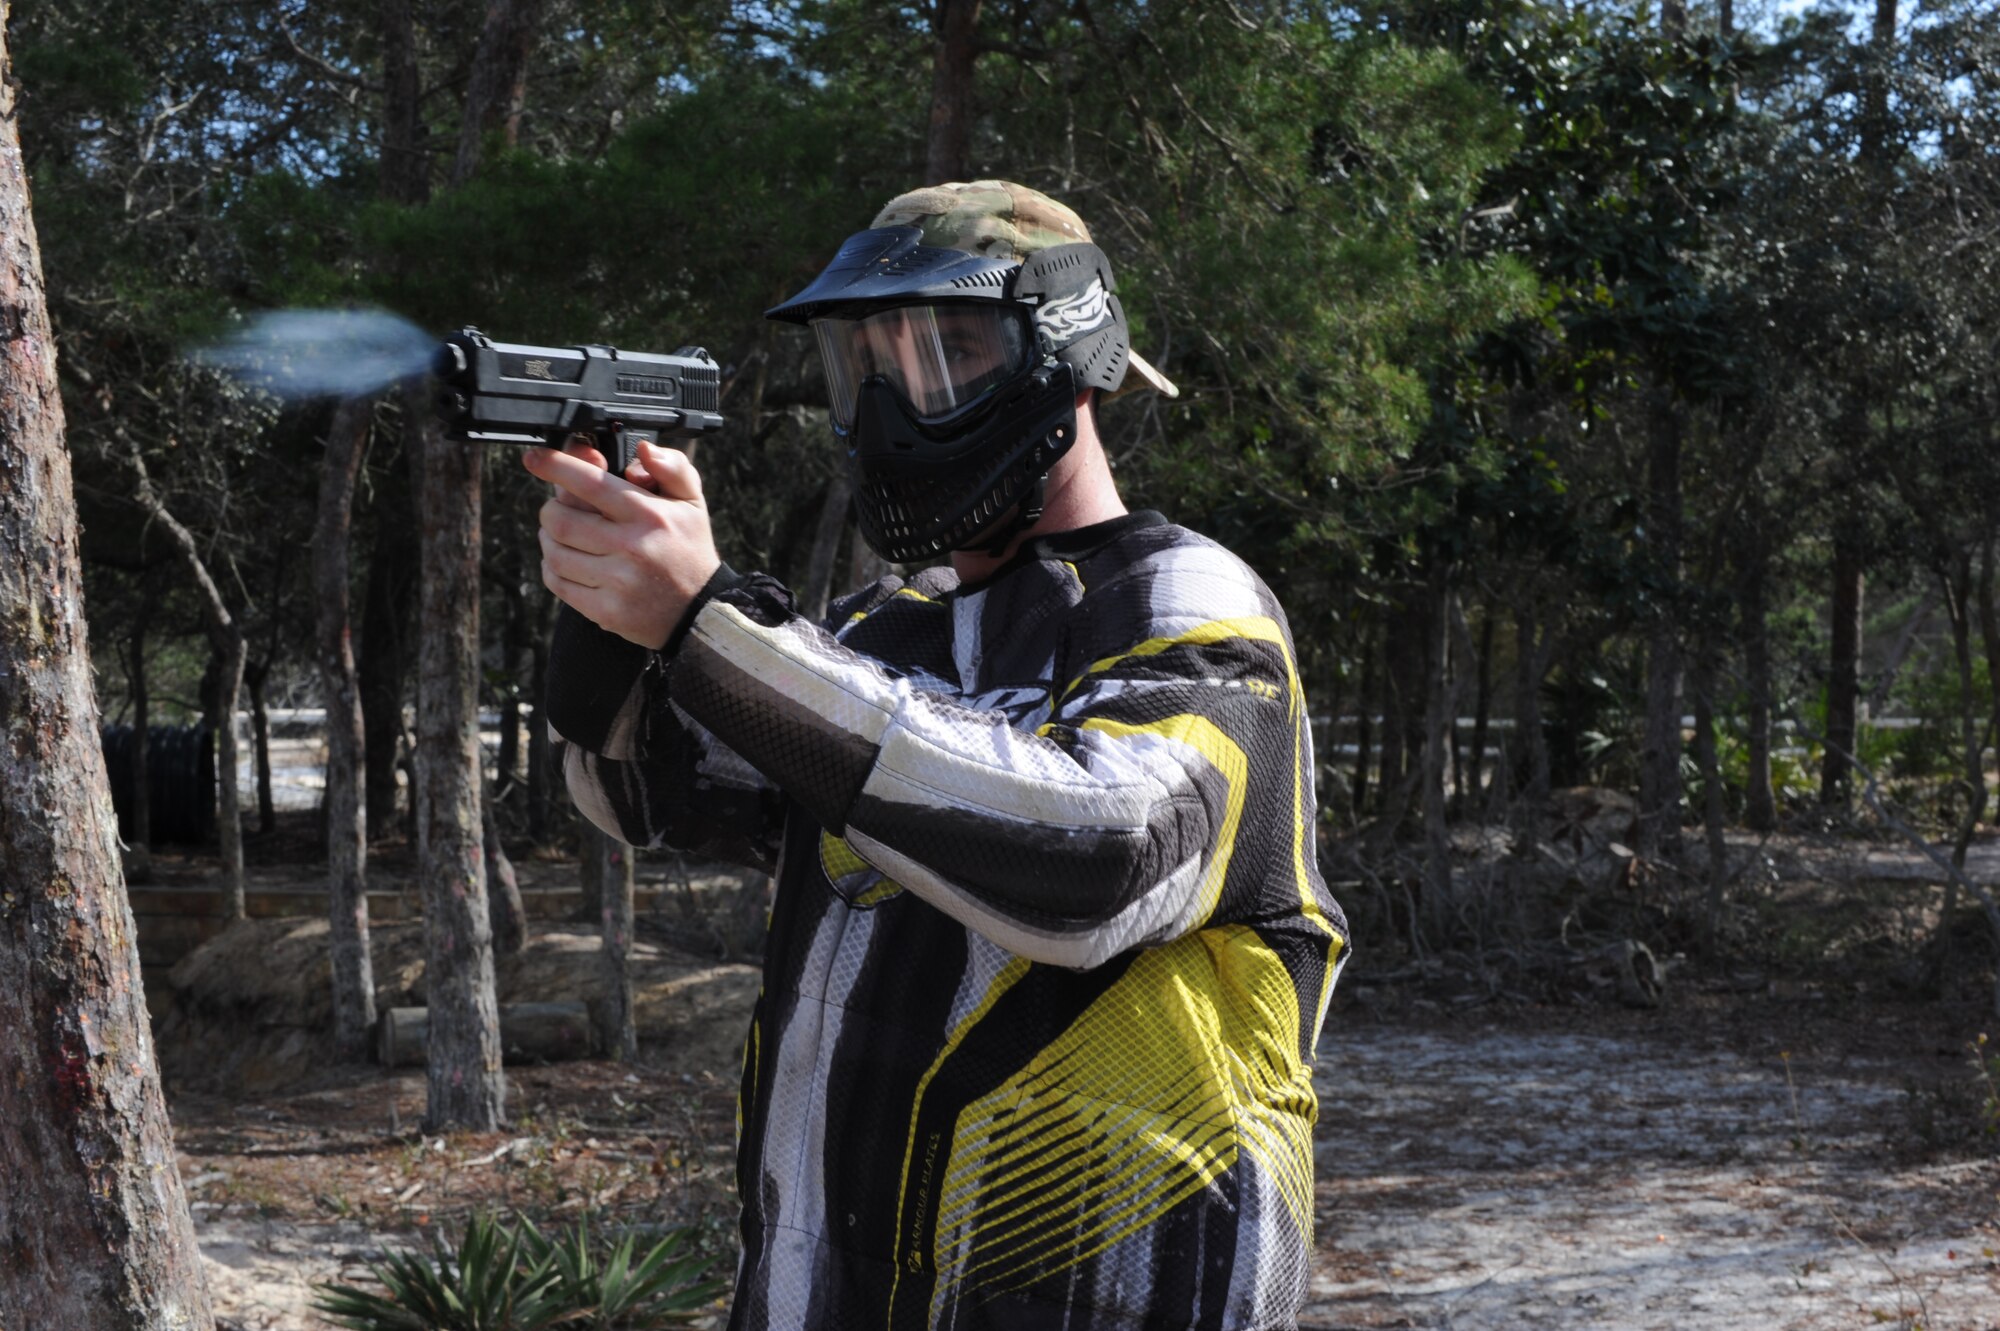 A Hurlburt Airman tests his air-powered paintball gun during a paintball match at the base paintball field at Hurlburt Field, Fla., Jan. 25, 2013. More than 40 Airmen used various types of paintball weapons during the free paintball challenge provided by the base community center. (U.S. Air Force photo / Senior Airman Joe McFadden)